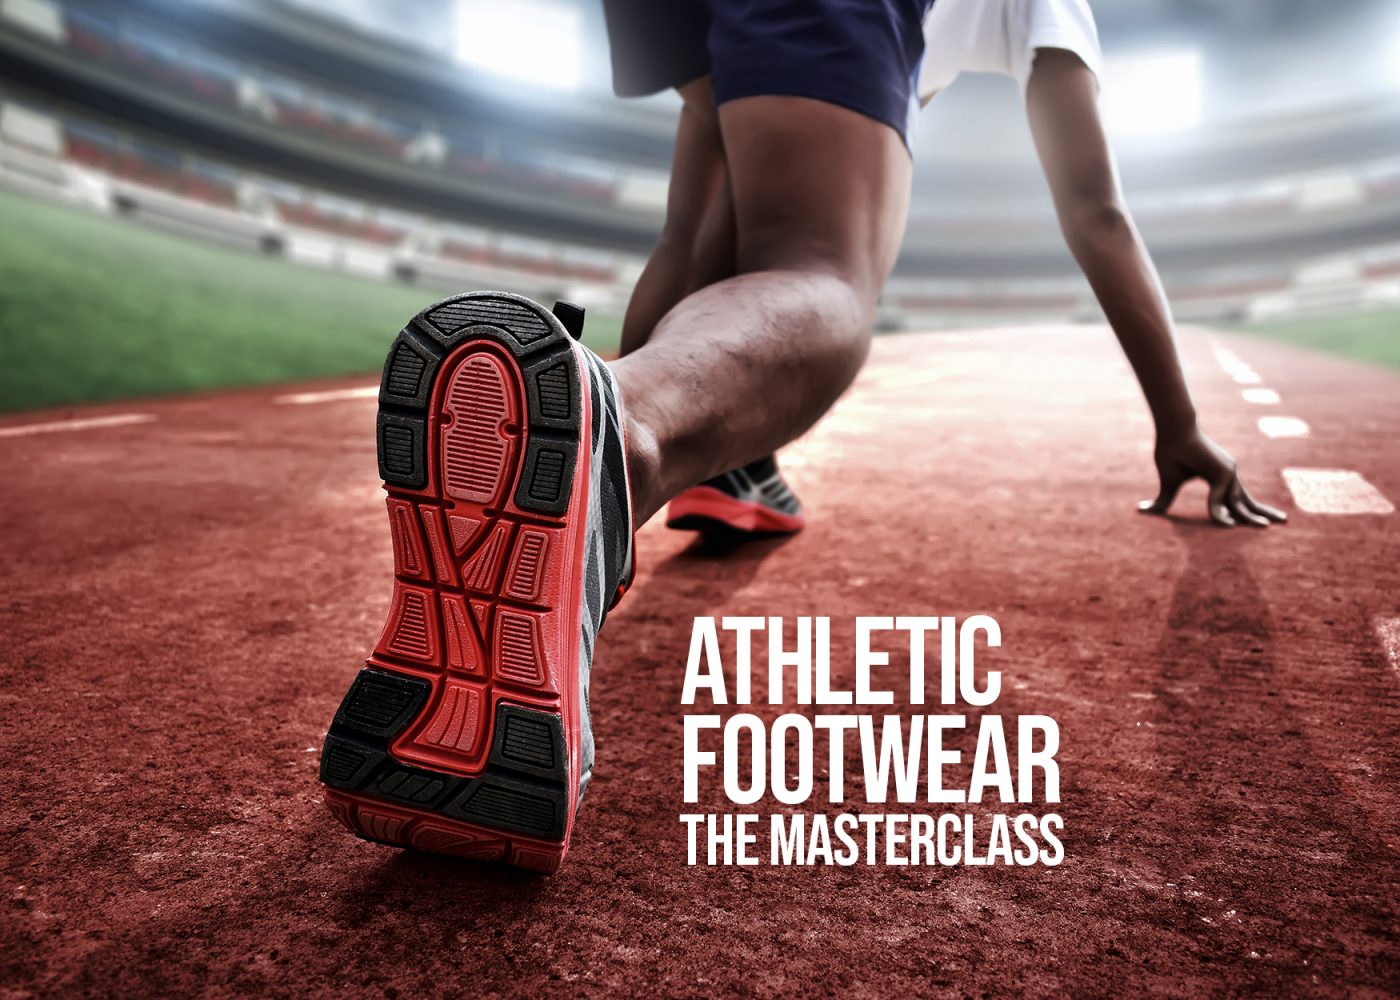 Athletic Footwear: The Masterclass